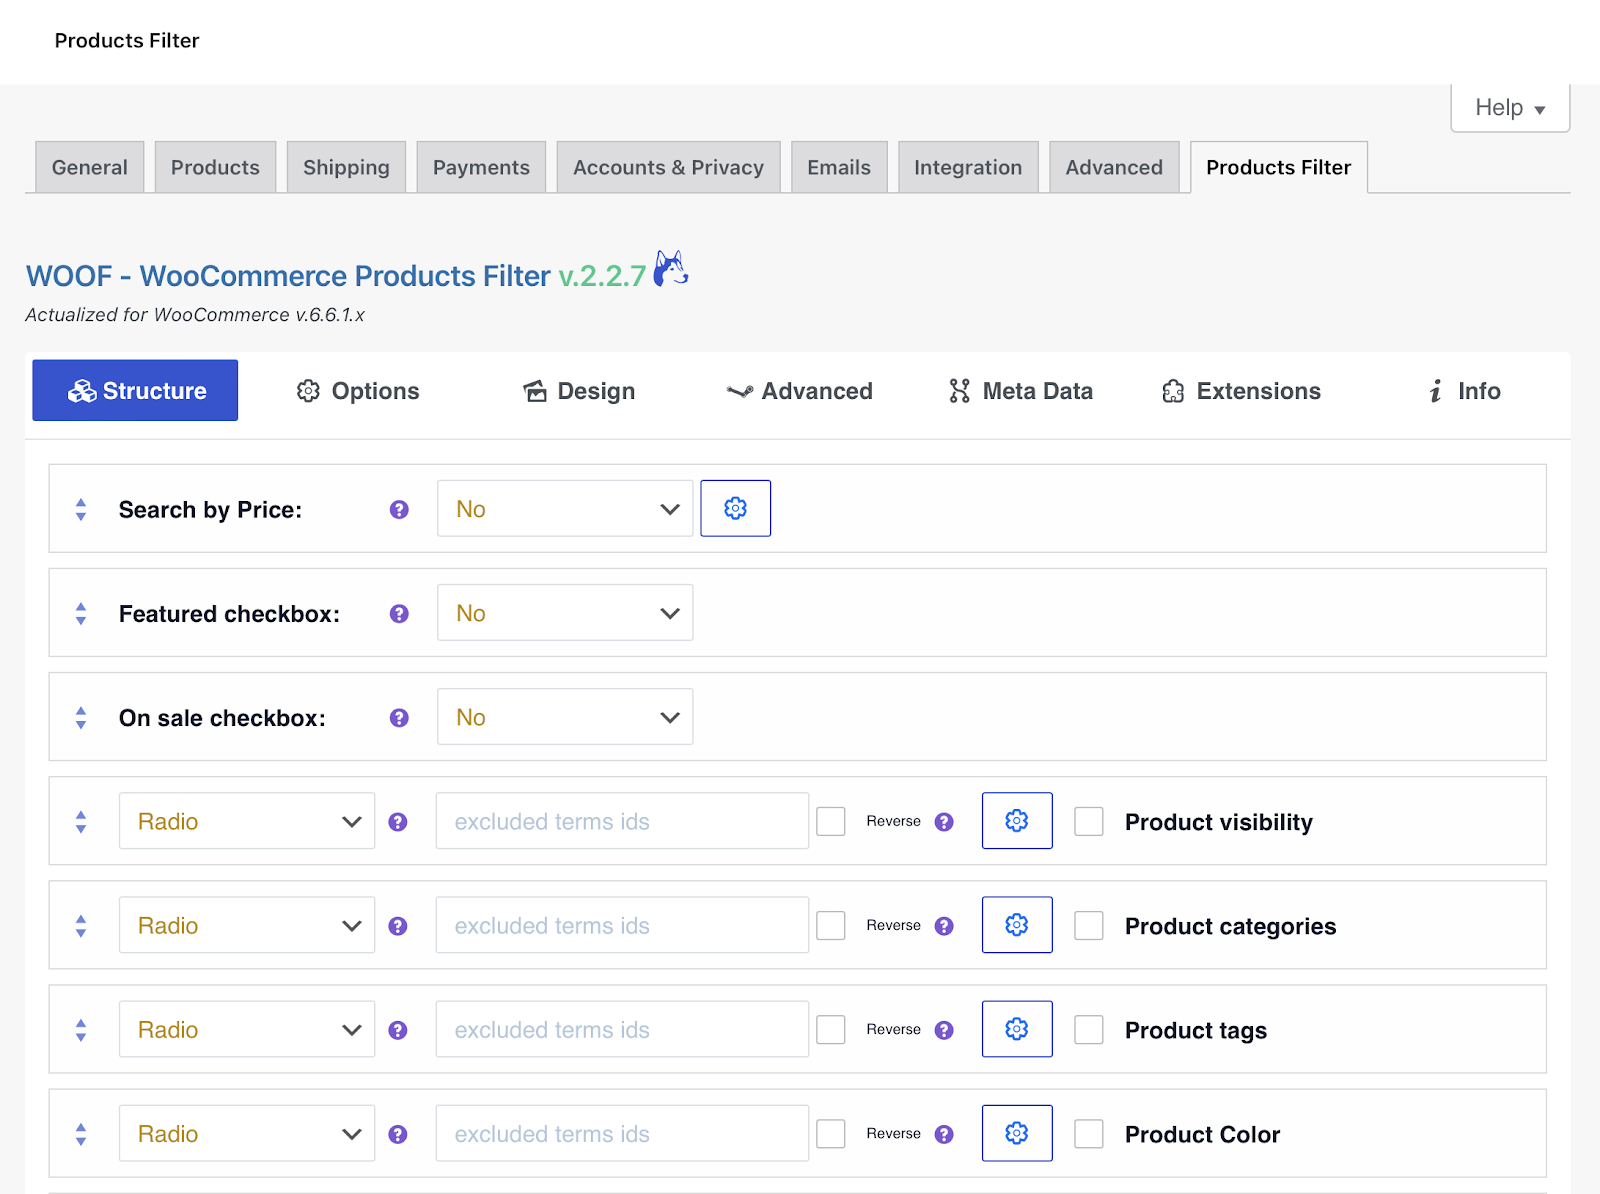 Product fiters offer three options: search by price, featured checkbox, on-sale checkbox.